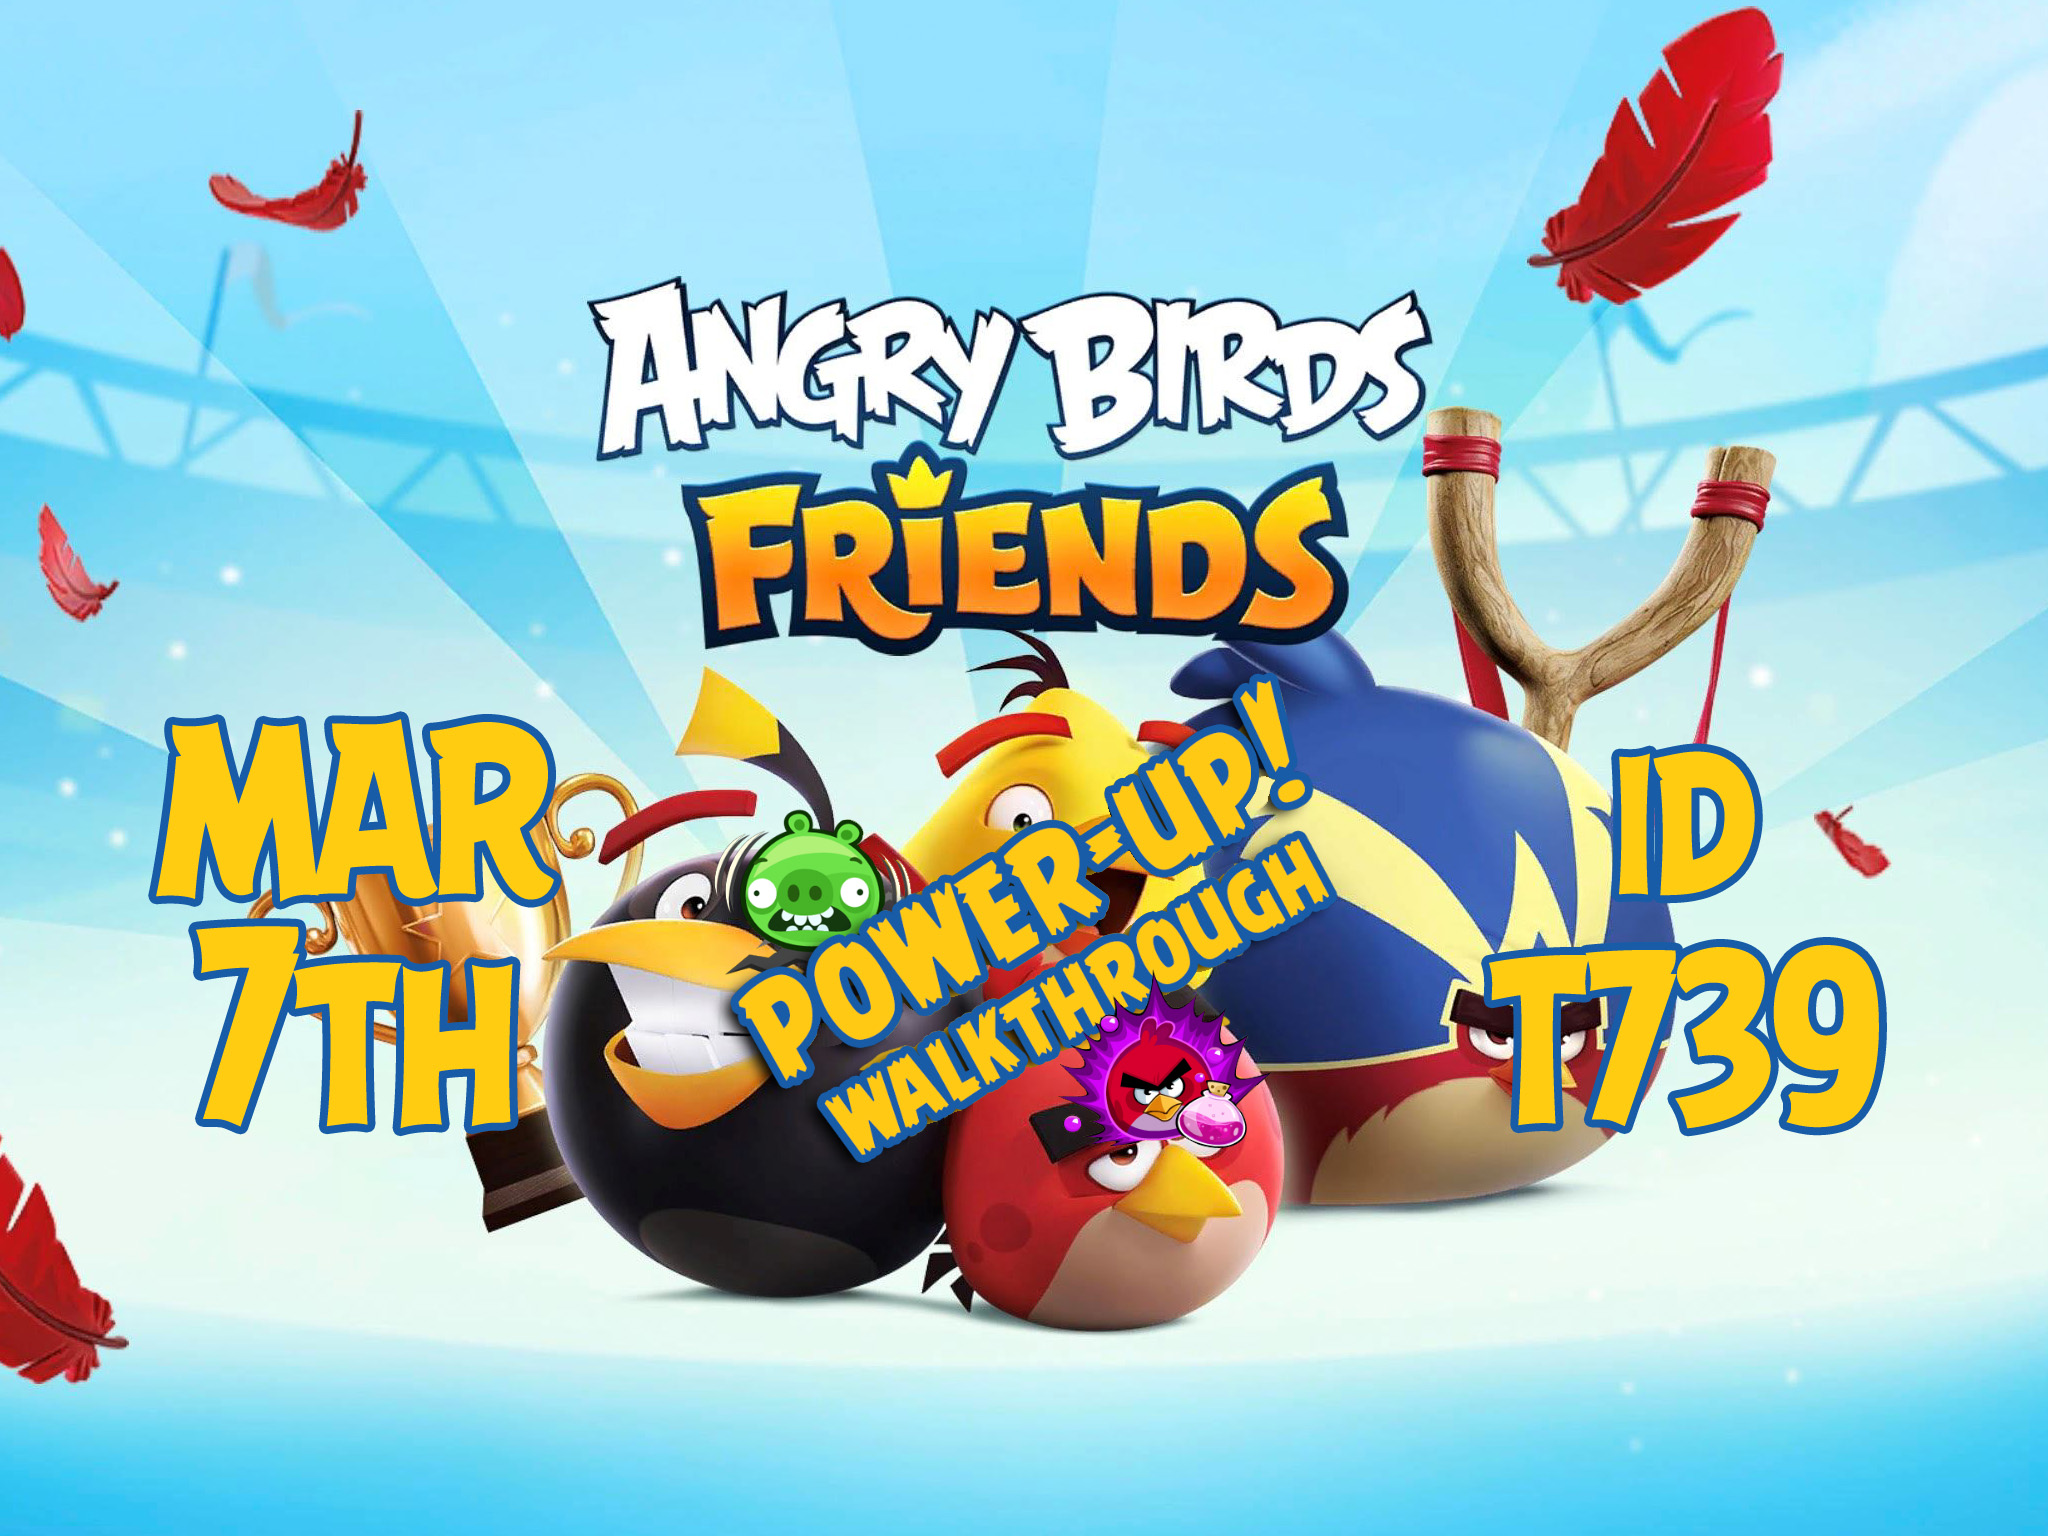 Angry-Birds-Friends-Tournament-T739-Feature-Image-PU